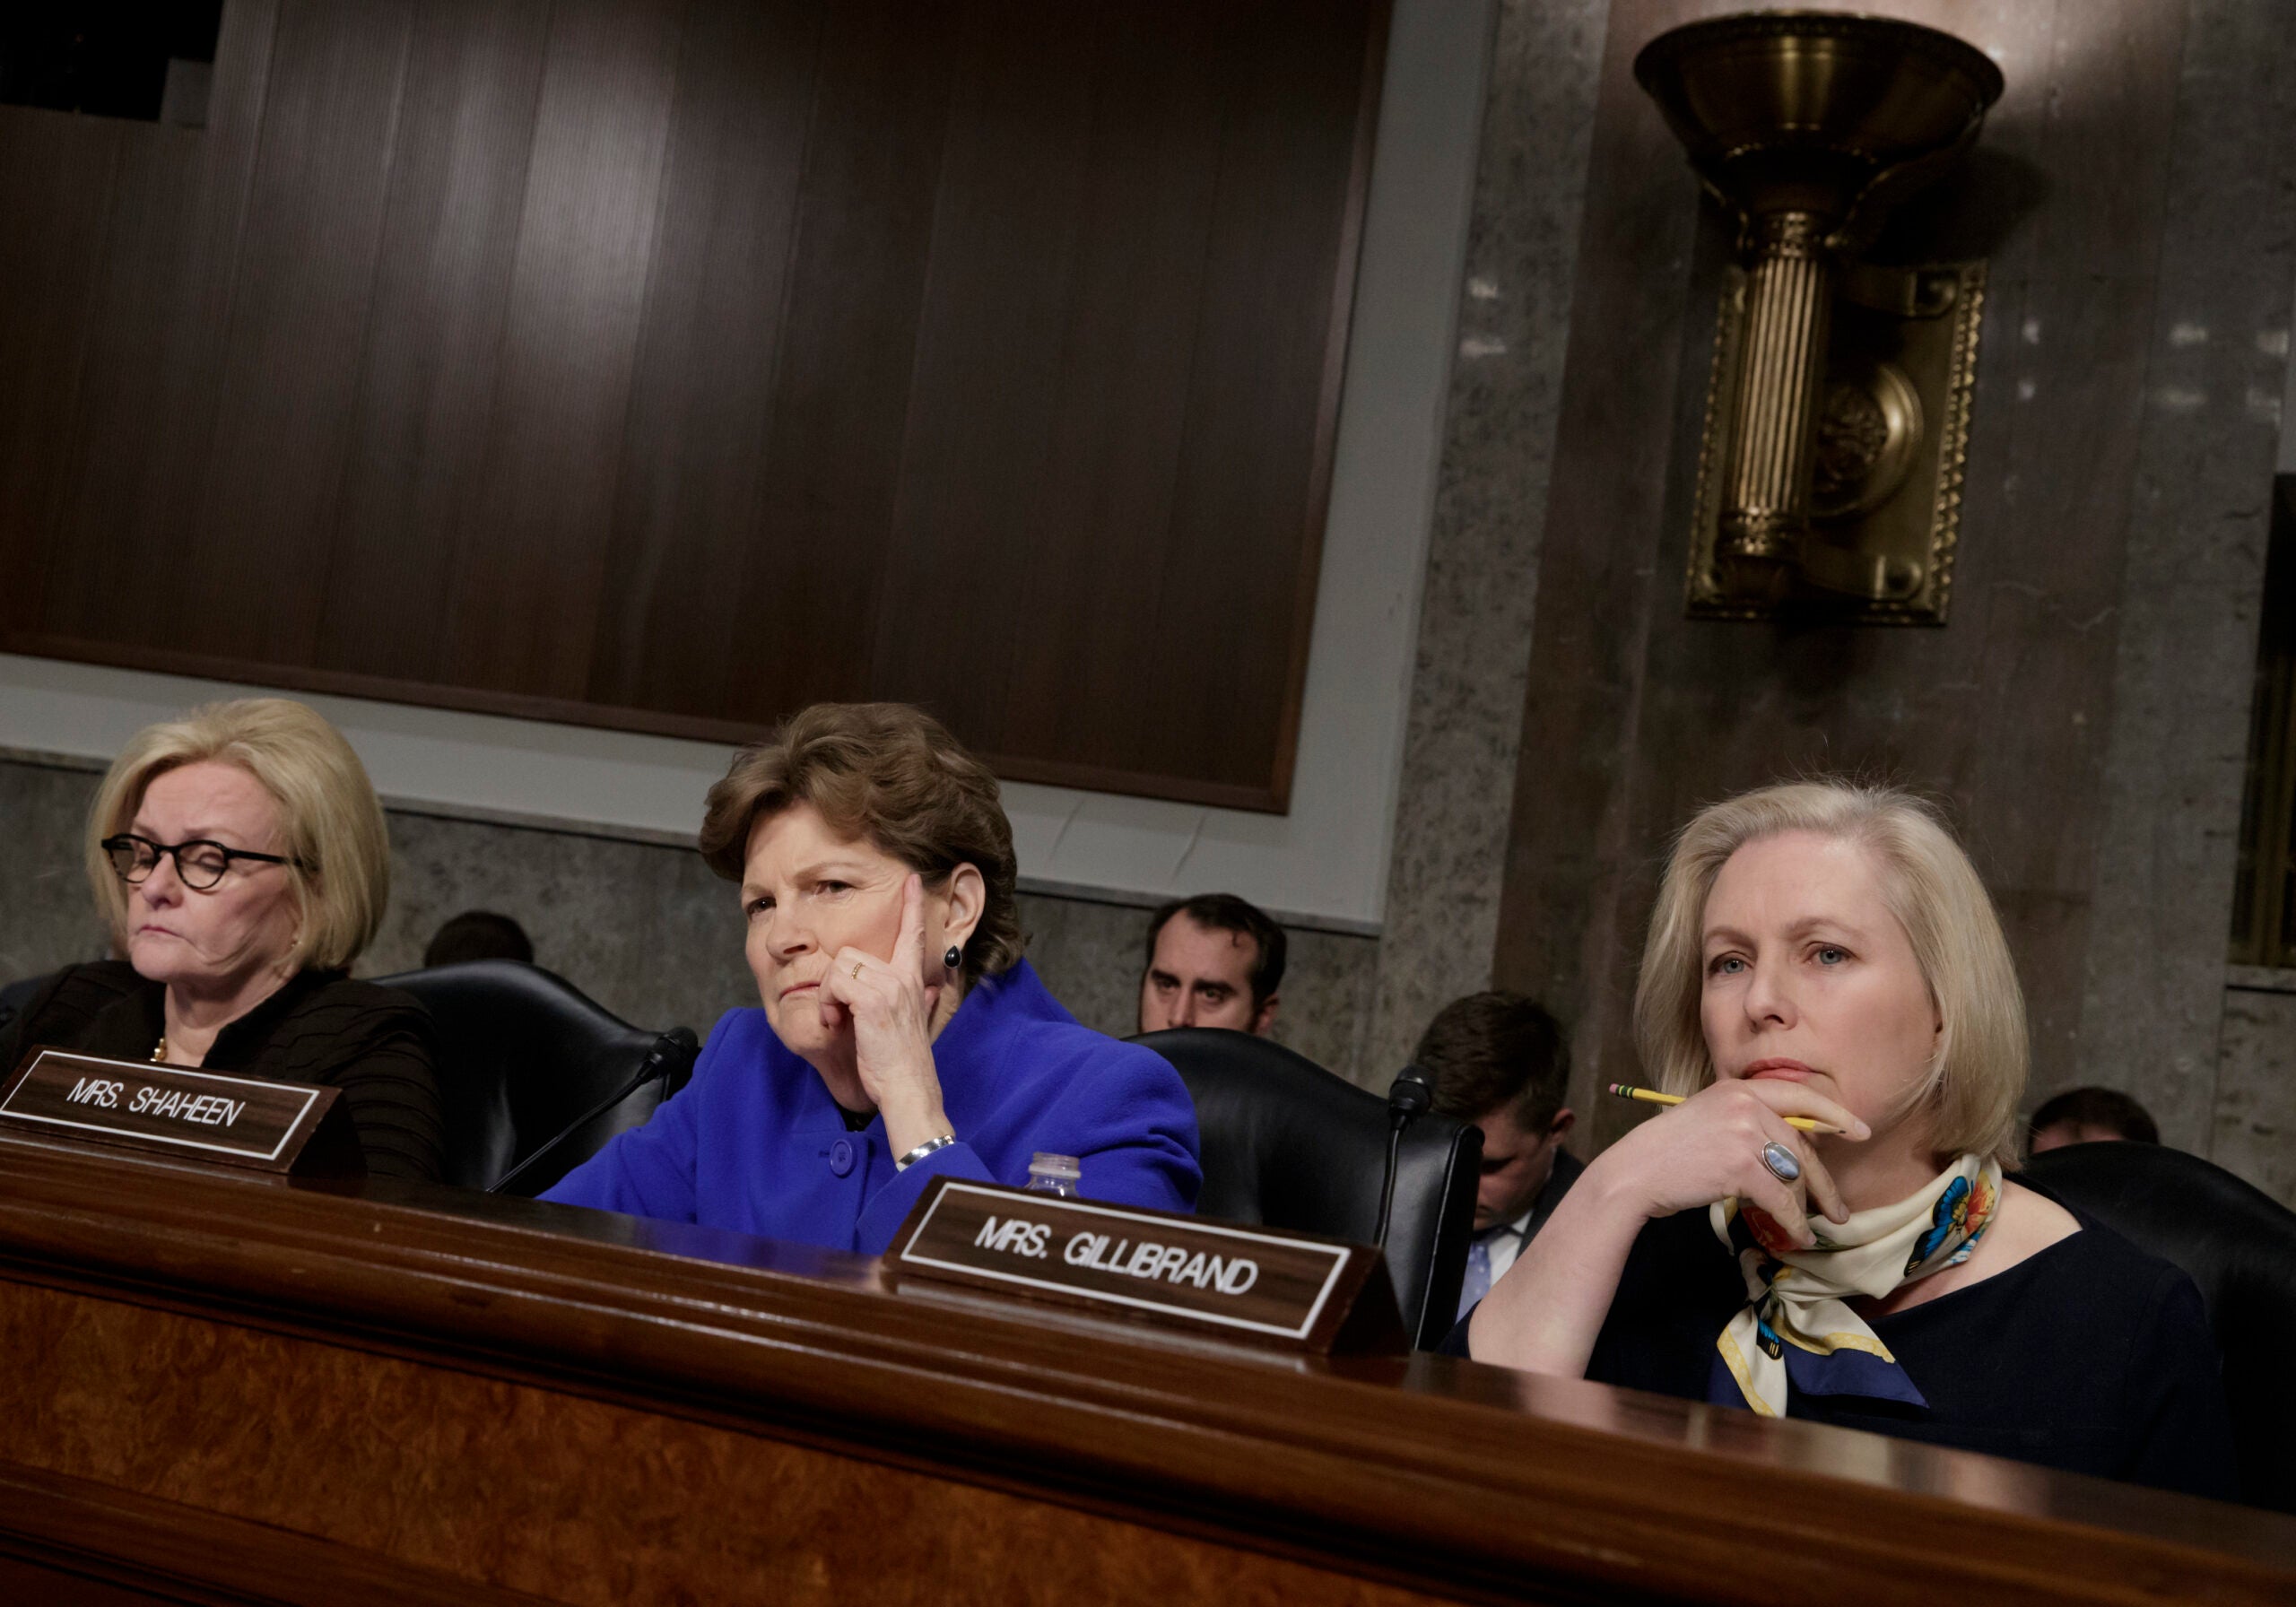 Sen. Kirsten Gillibrand, D-N.Y.,right, joined at left by Sen. Jeanne Shaheen, D-N.H., and Sen. Claire McCaskill, D-Mo., far left, questions Marine Gen. Robert B. Neller, the commandant of the Marine Corps, at a Senate Armed Services Committee hearing on the investigation of nude photographs of female Marines and other women that were shared on the Facebook page "Marines United," on Capitol Hill in Washington, Tuesday, March, 14, 2017. (AP Photo/J. Scott Applewhite)